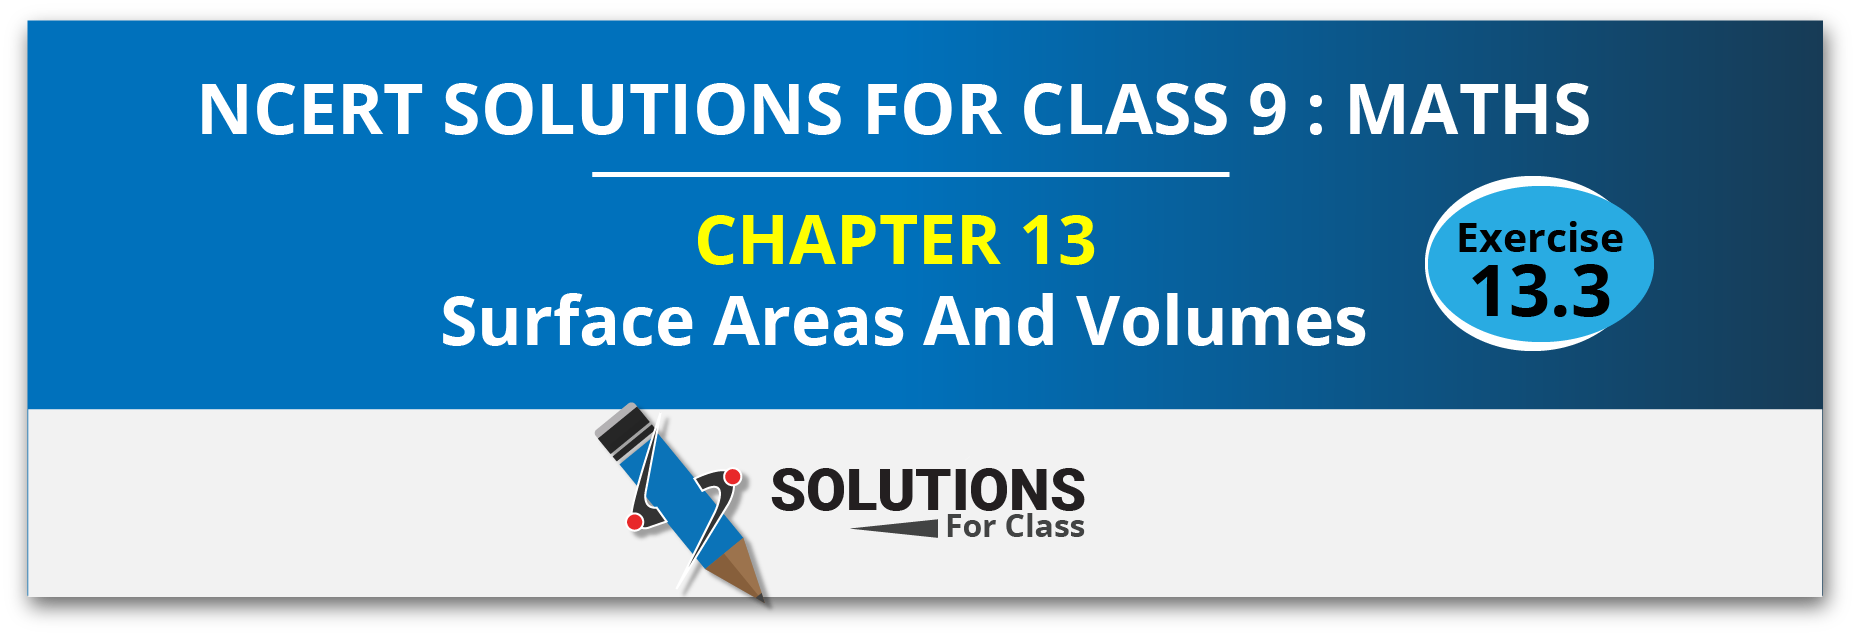 NCERT Solution For Class 9, Maths, Chapter 13, Surface Areas And Volumes, Exercise 13.3